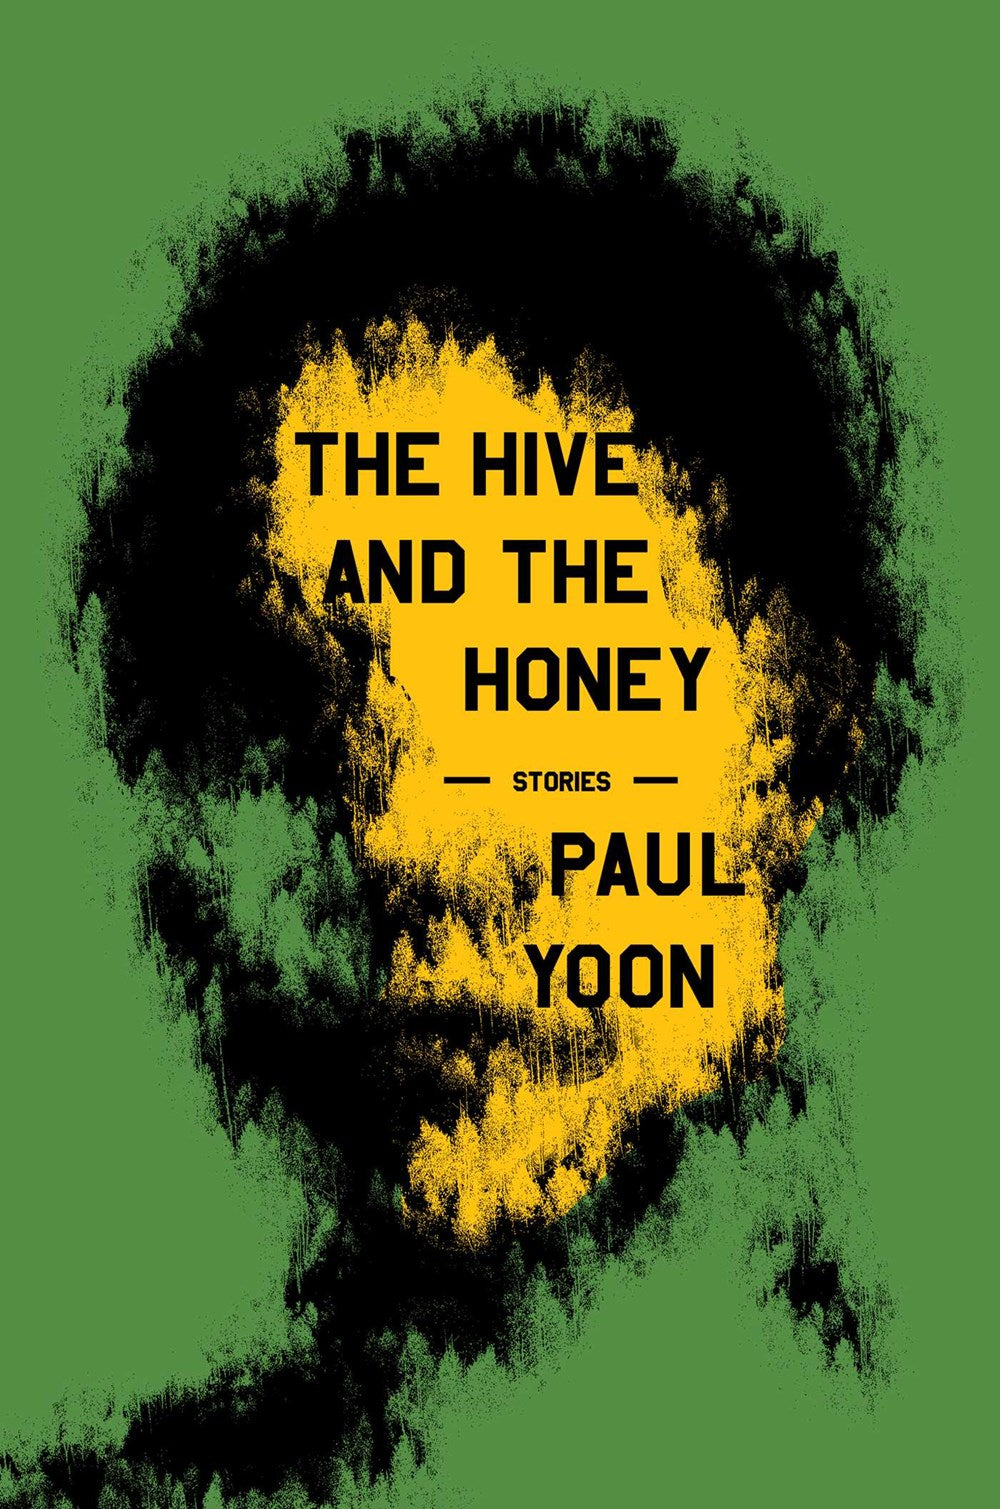 The Hive and the Honey: Stories by Paul Yoon (10/10/23)